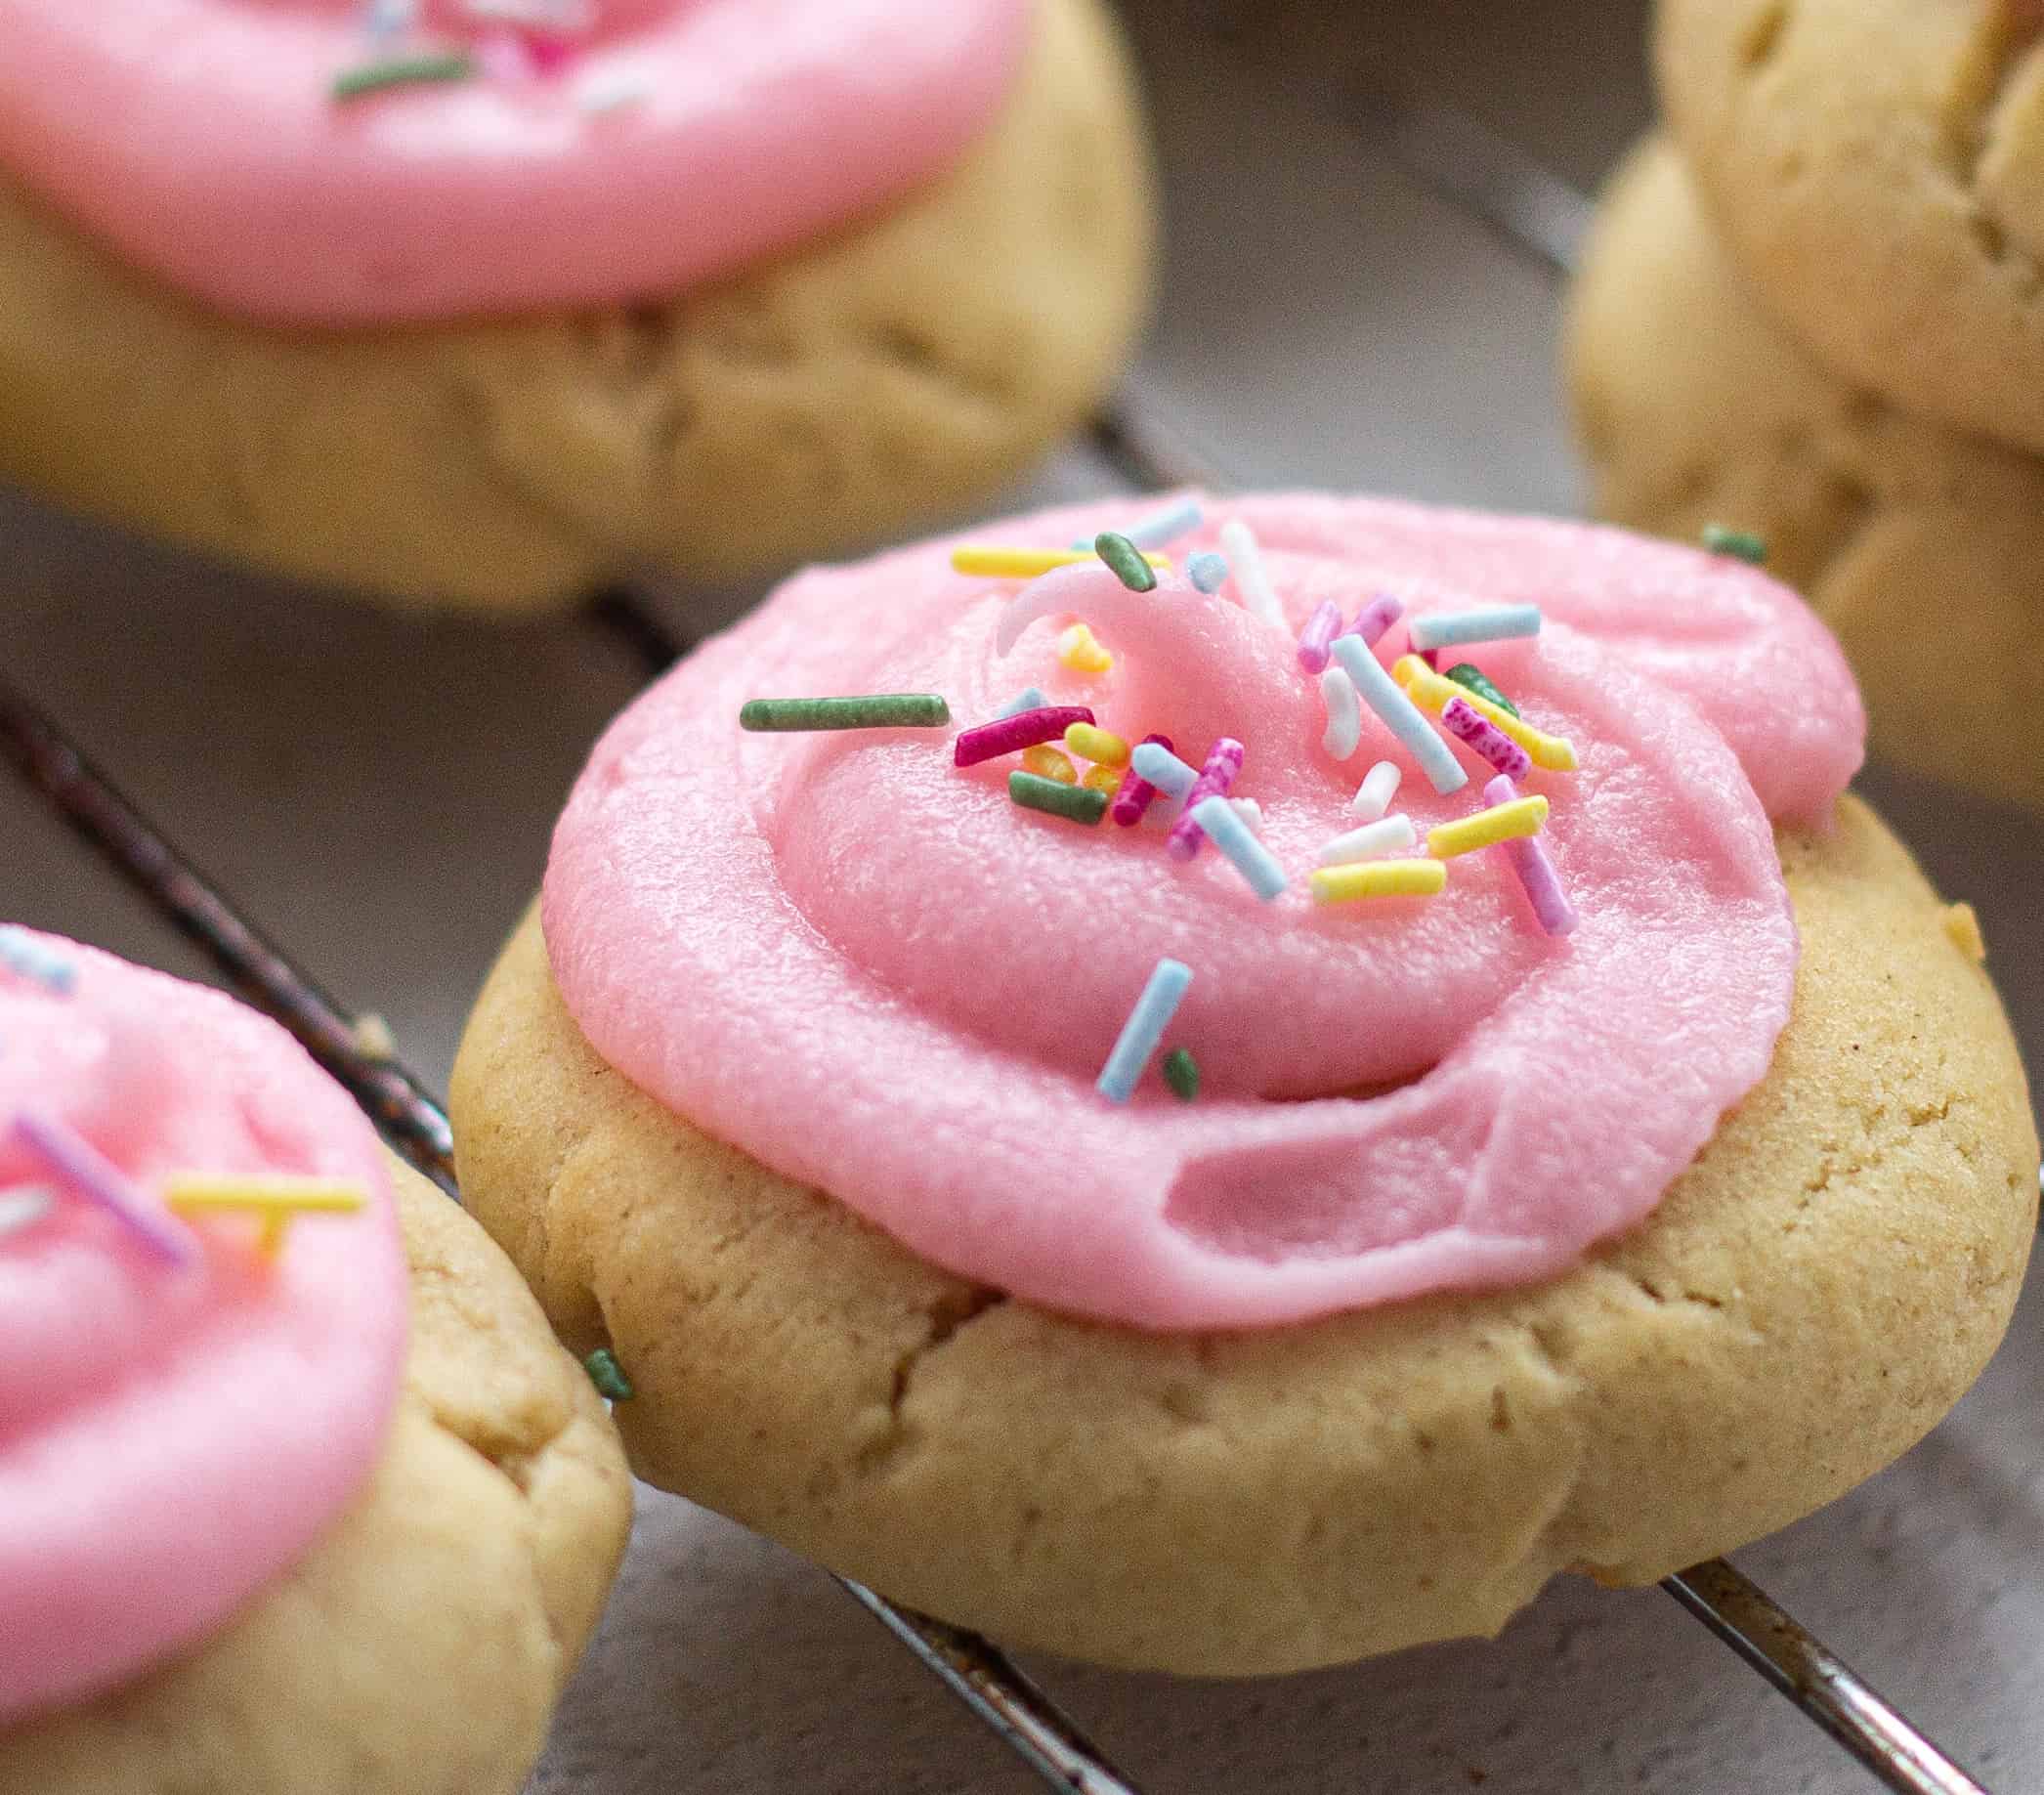 A close up of a pink cookie with sprinkles